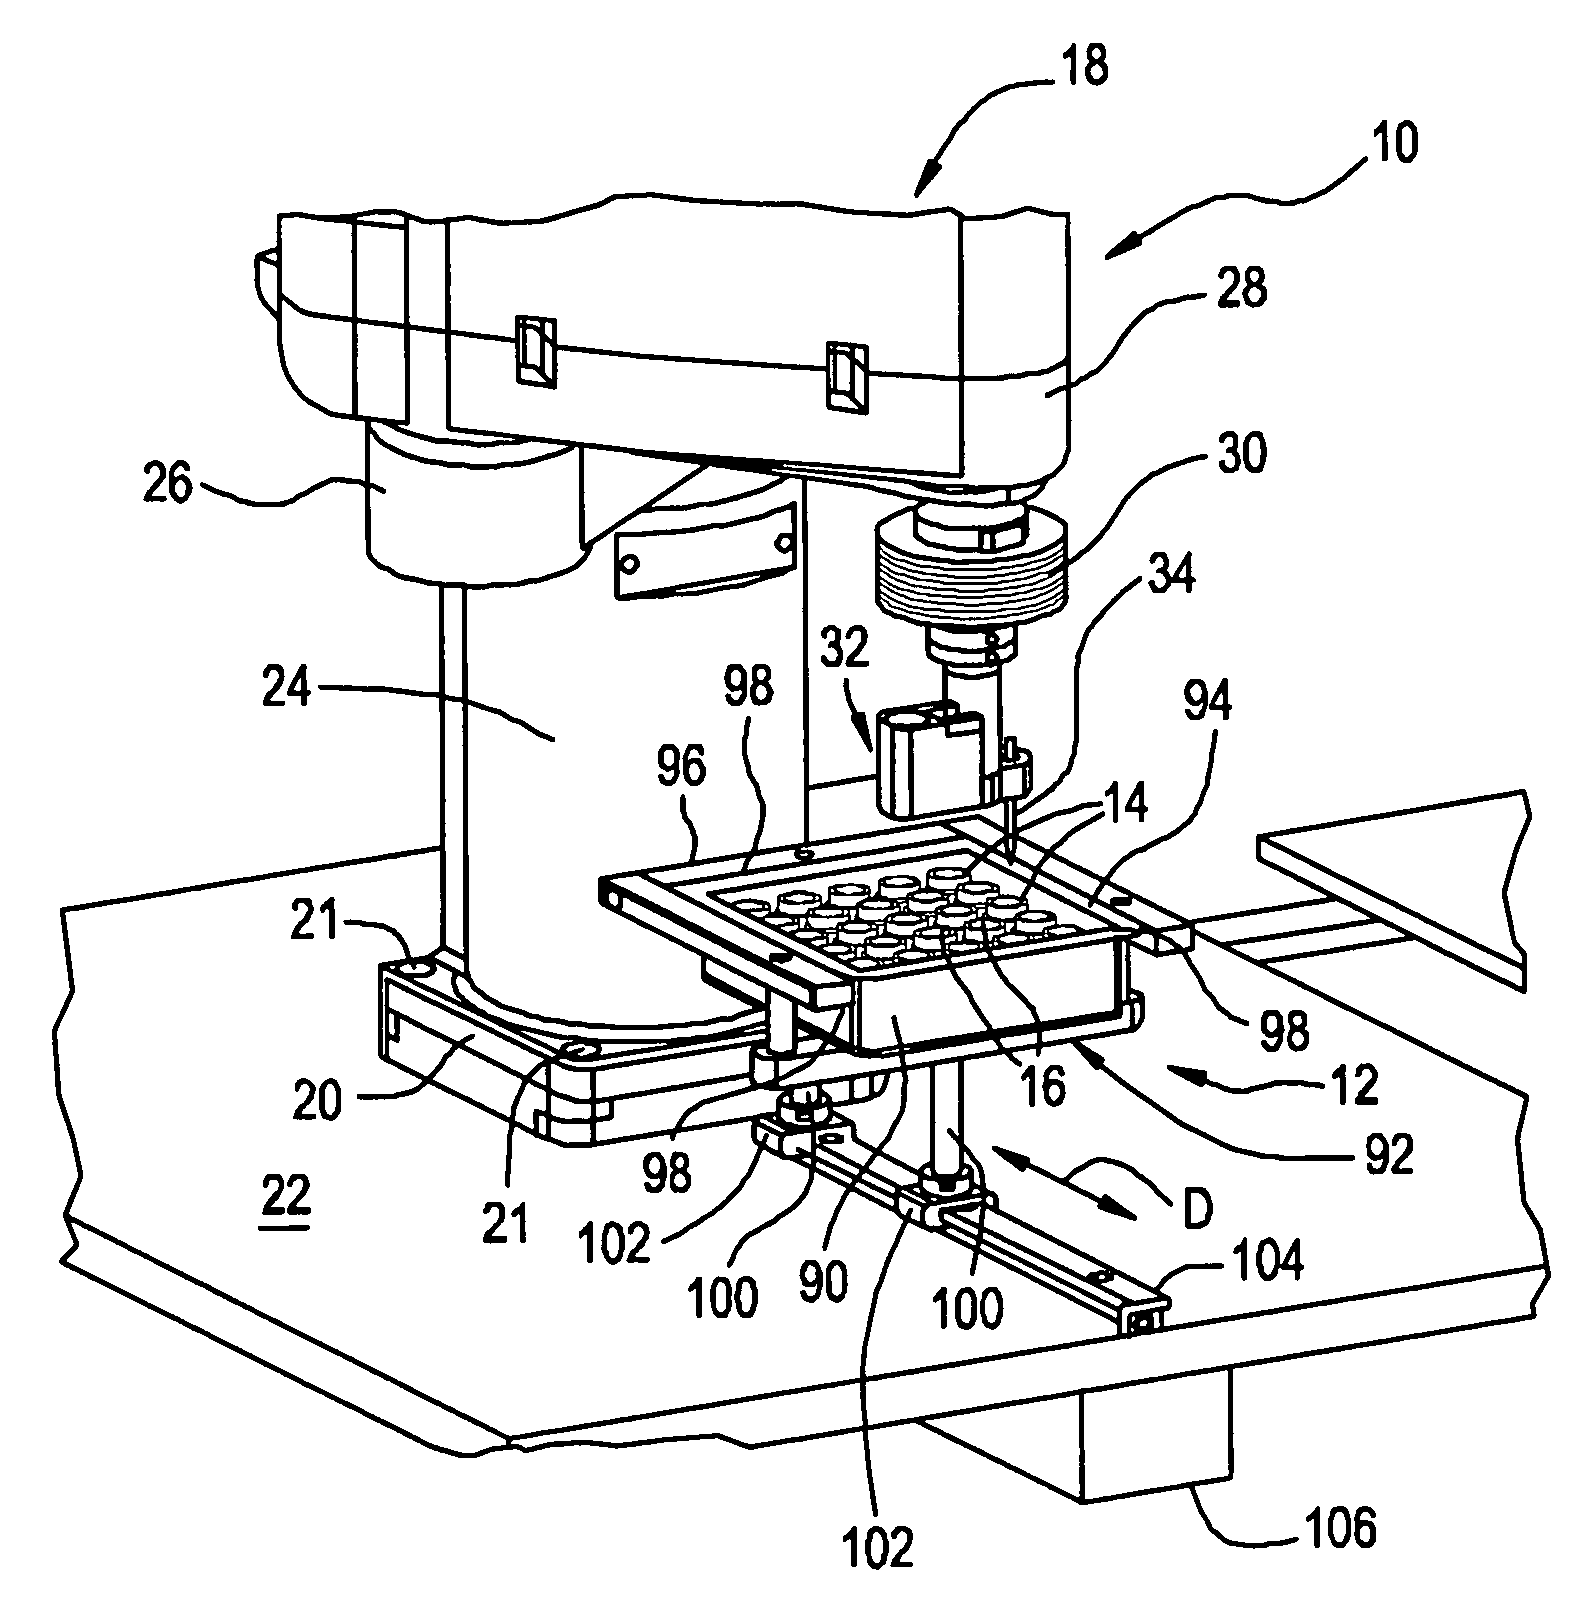 Apparatus and method for needle filling and laser resealing